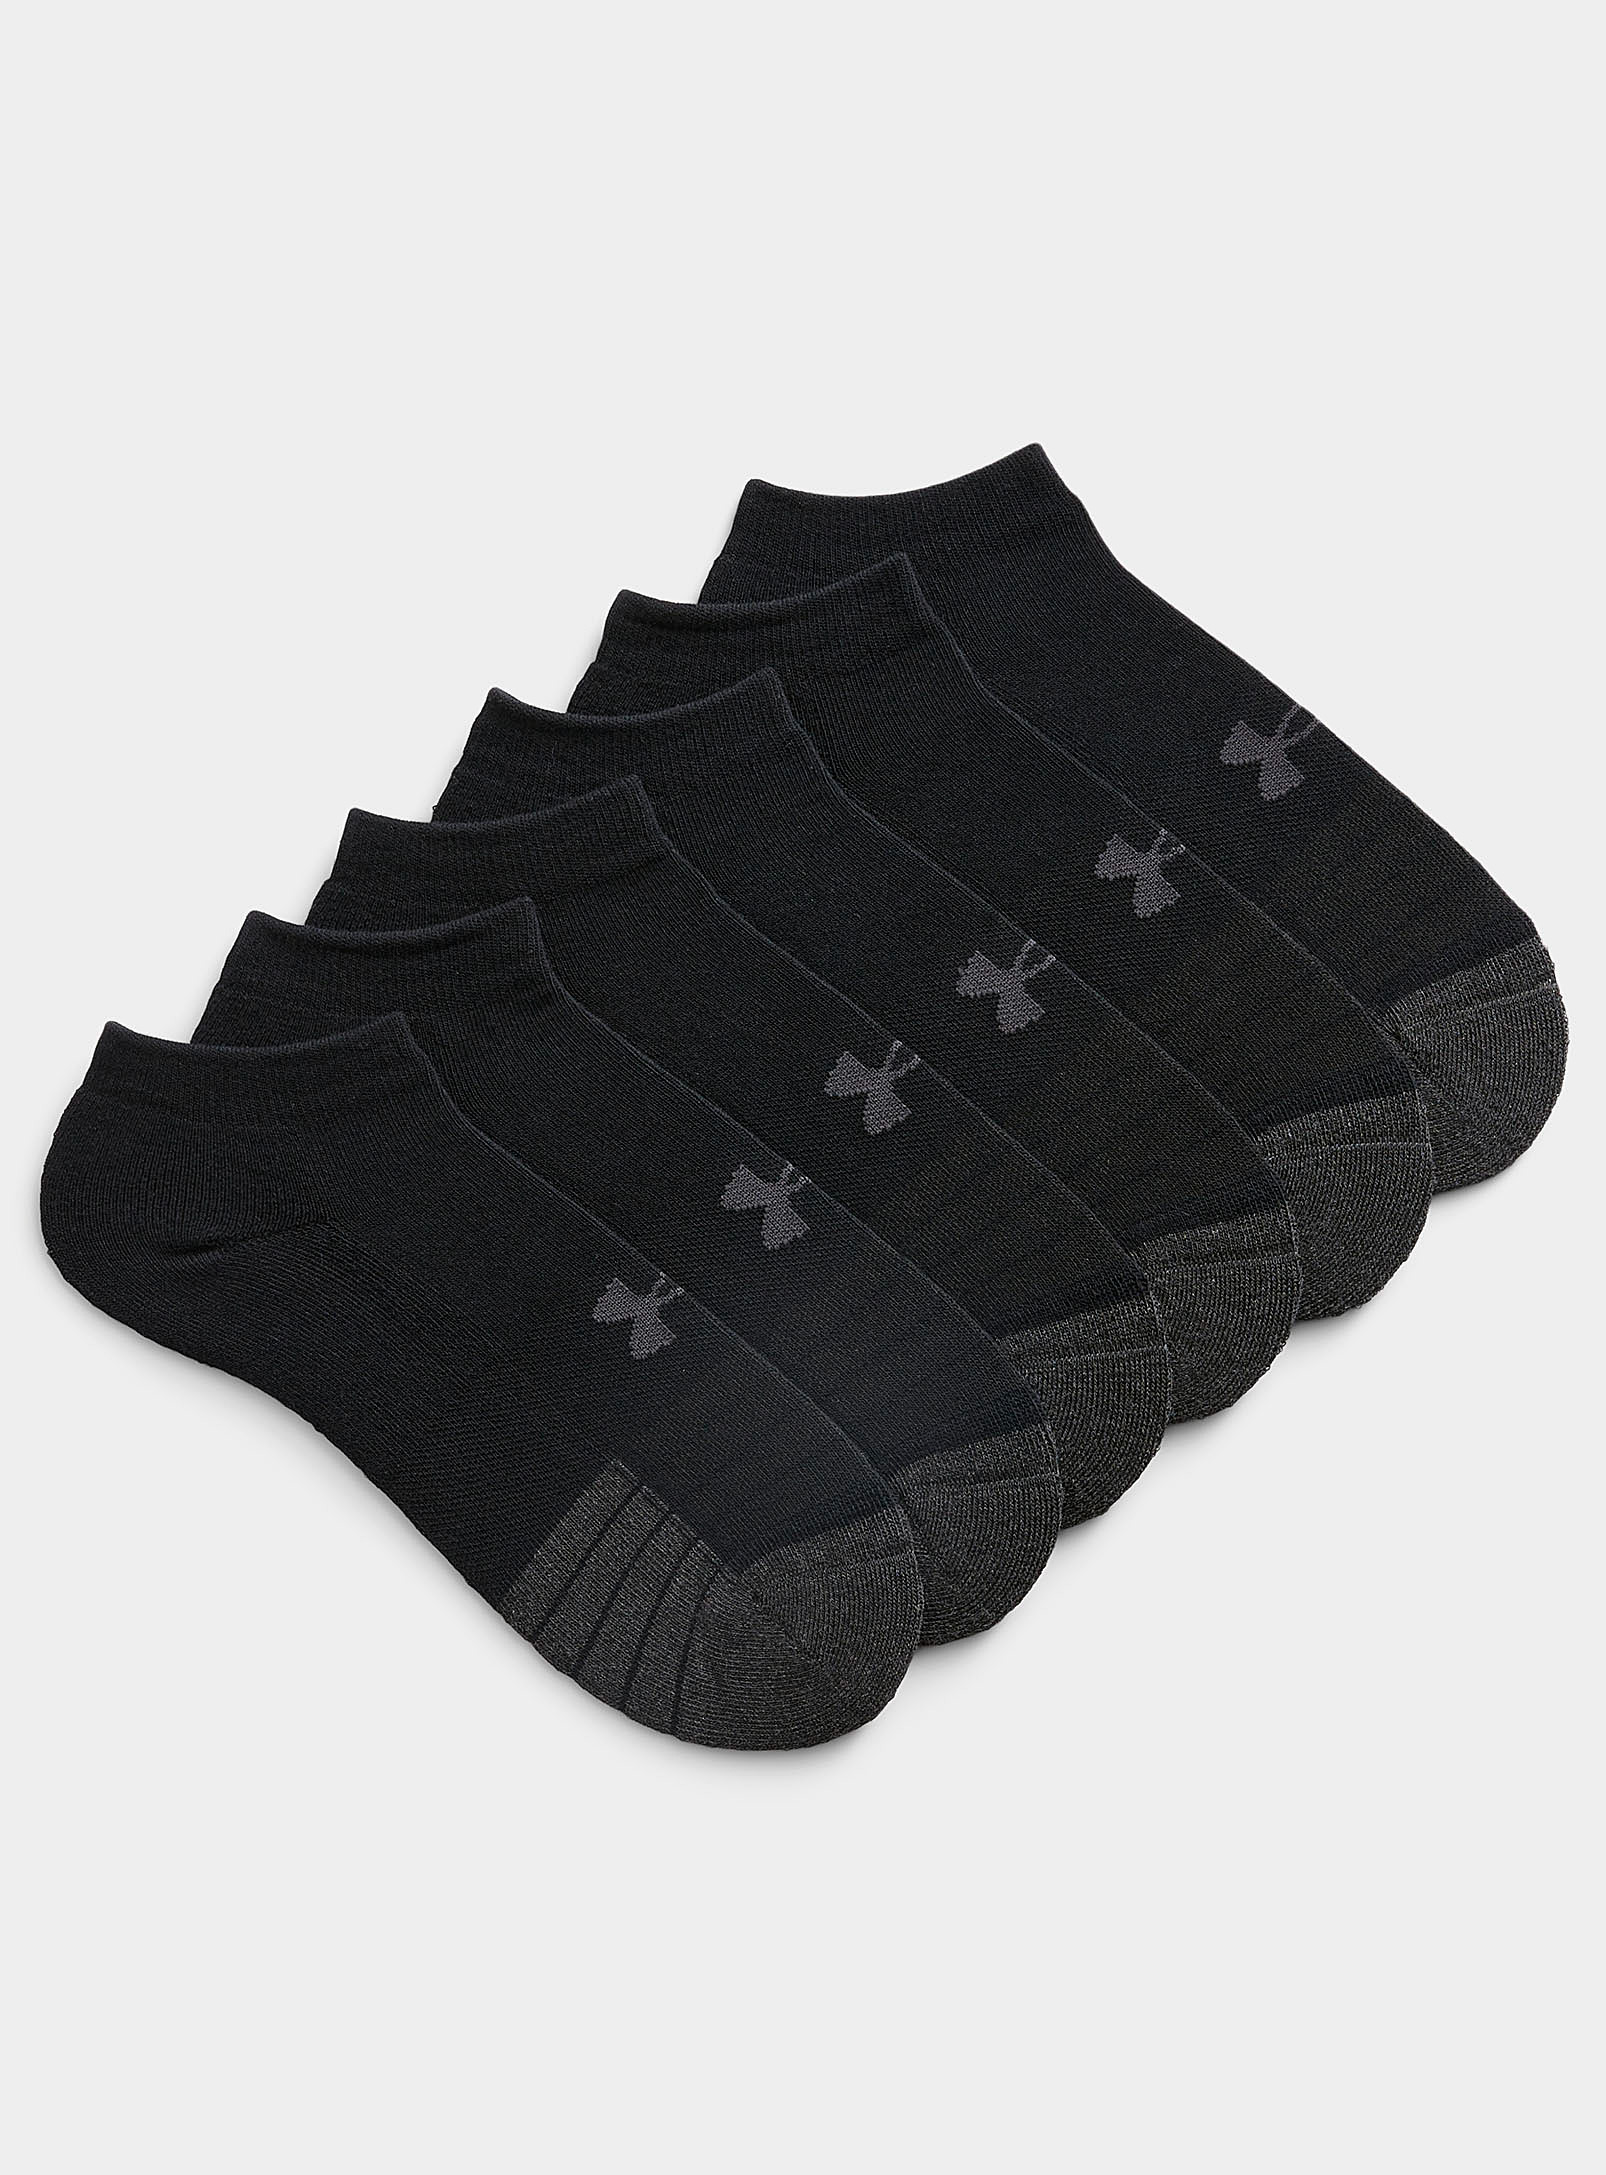 Under Armour - Men's Performance Tech padded ped socks Set of 6